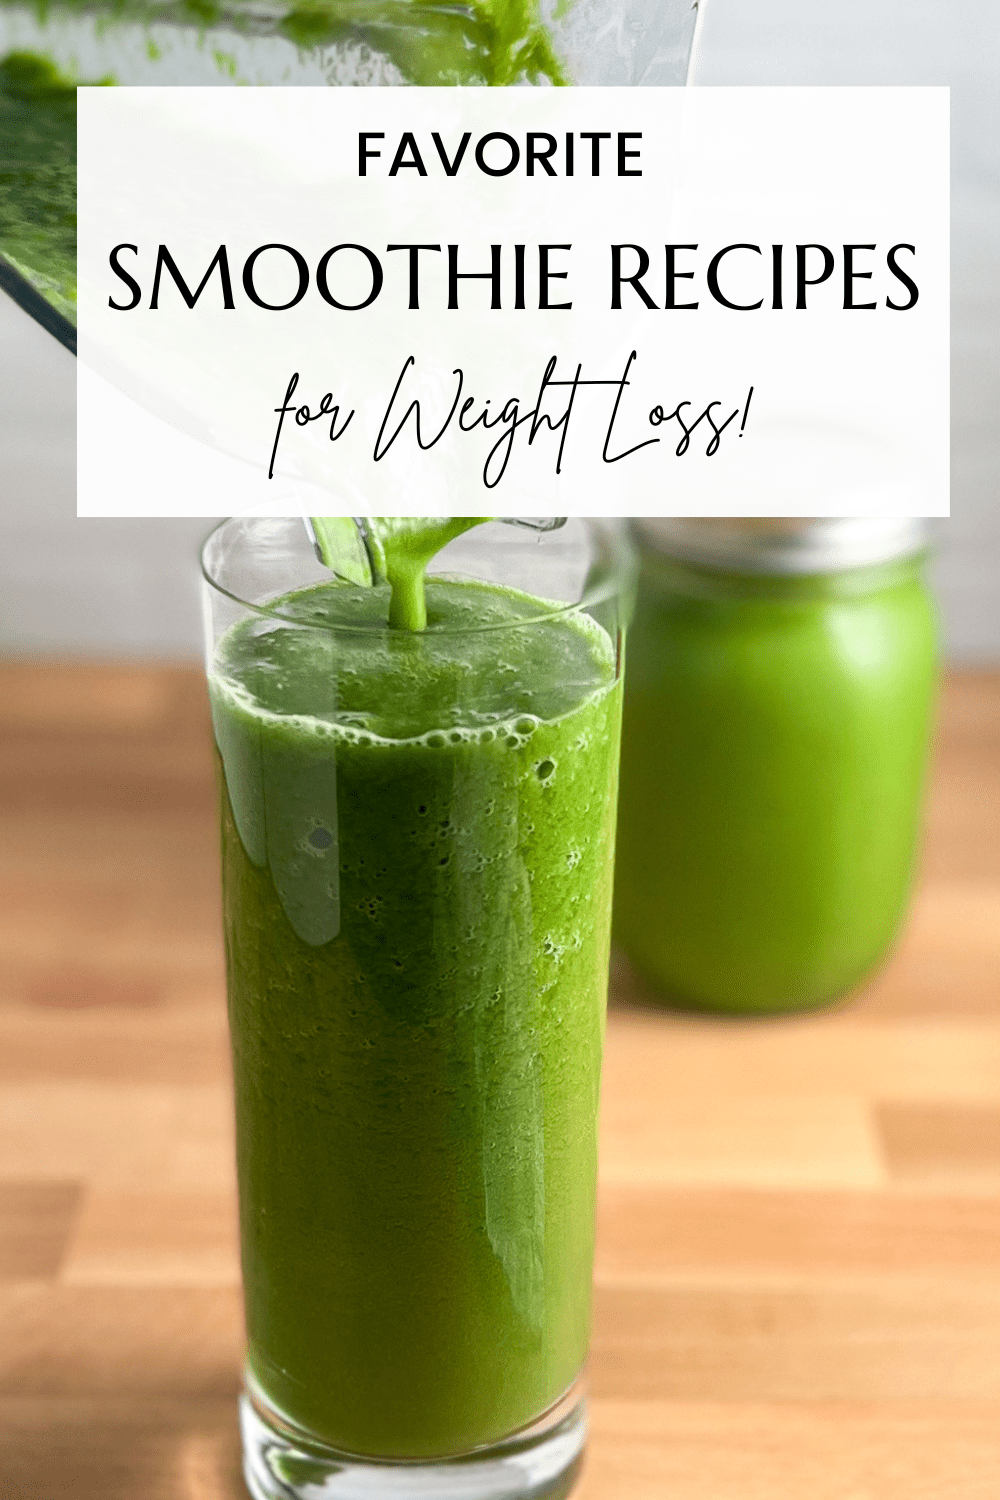 favorite smoothies for weight loss graphic showing a green smoothie in a tall glass with another smoothie in mason jar blurred in the background